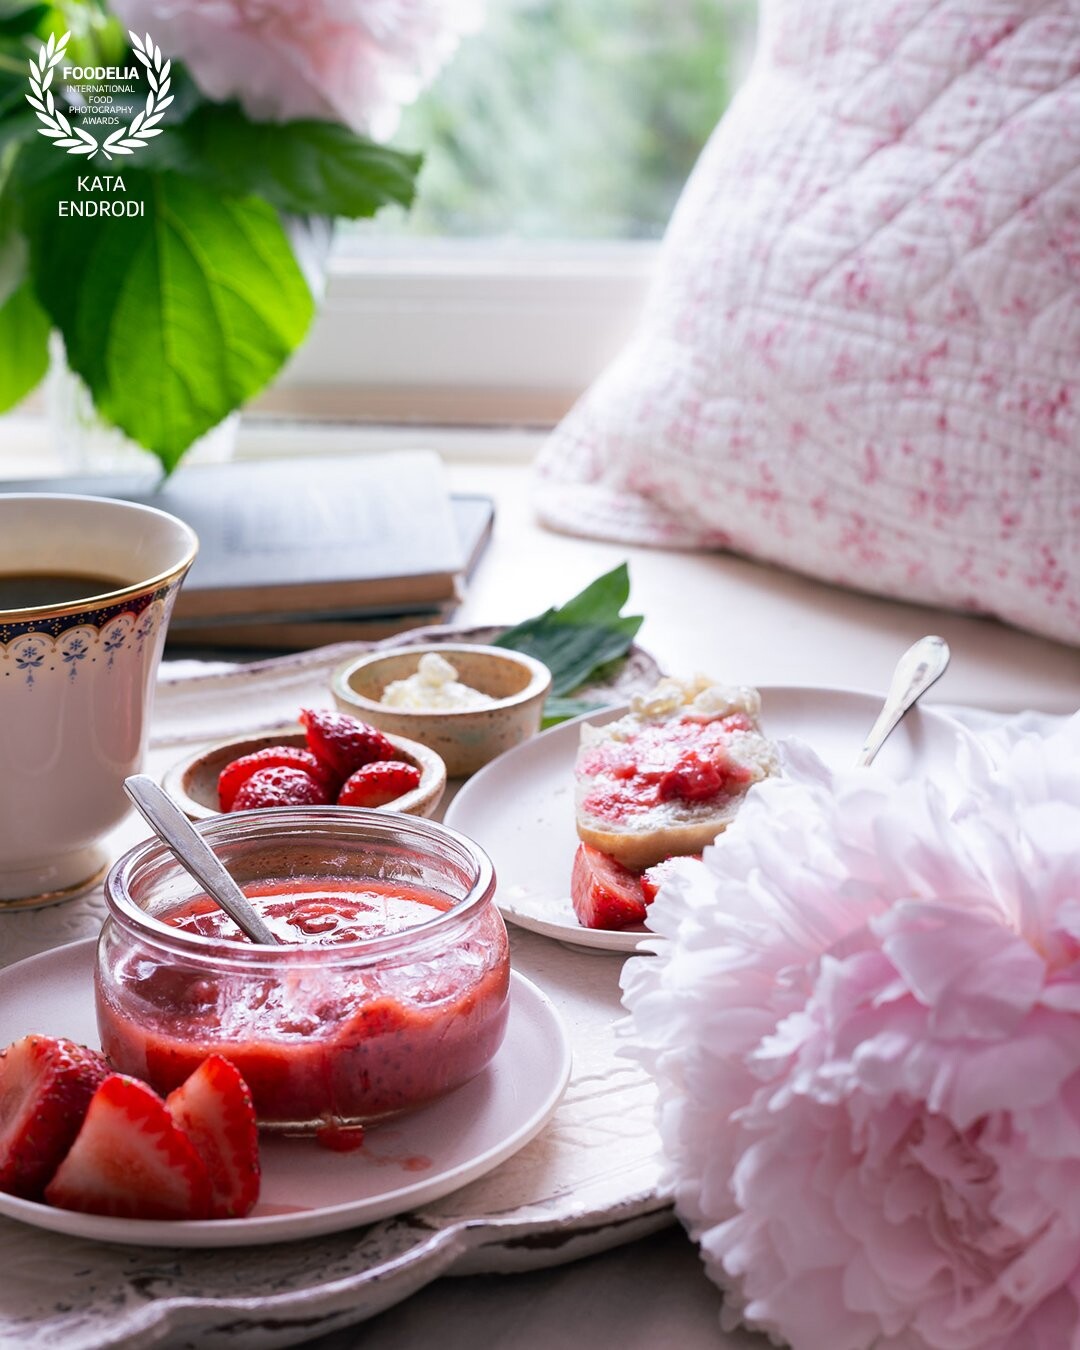 Cozy pink breakfast still-life: strawberry rhubarb jam, toast and coffee, with the suggestion of a view into a summer garden. Fresh peonies complete the scene.